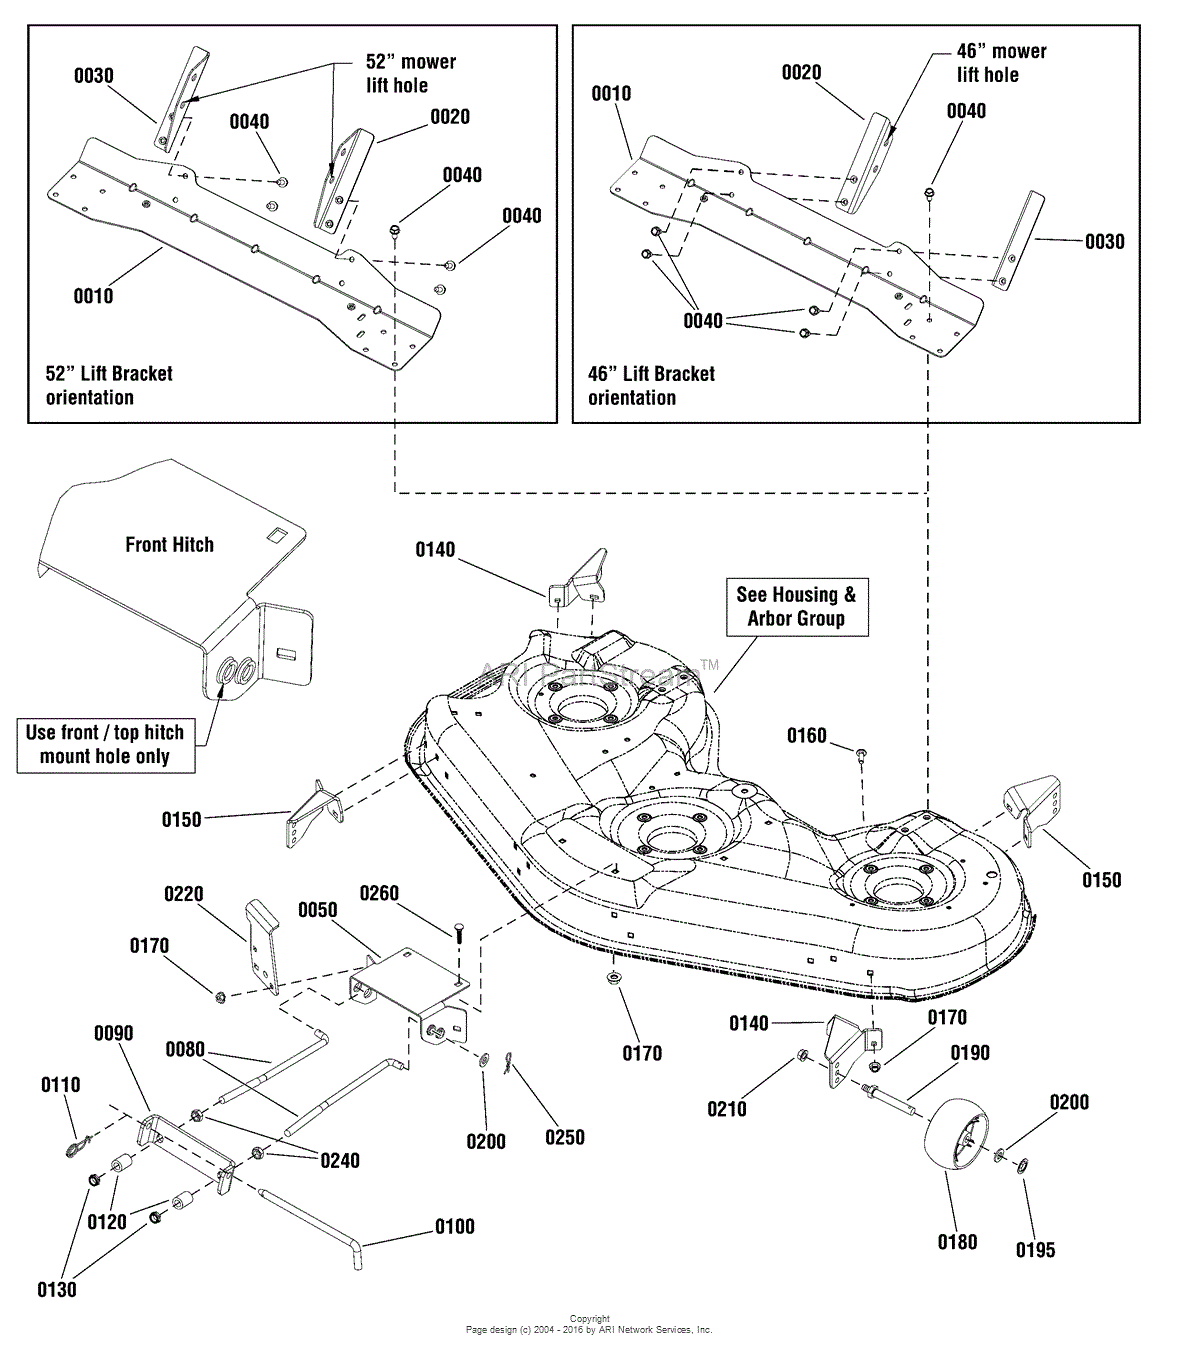 Wiring Diagram For Snapper Riding Mower Gx